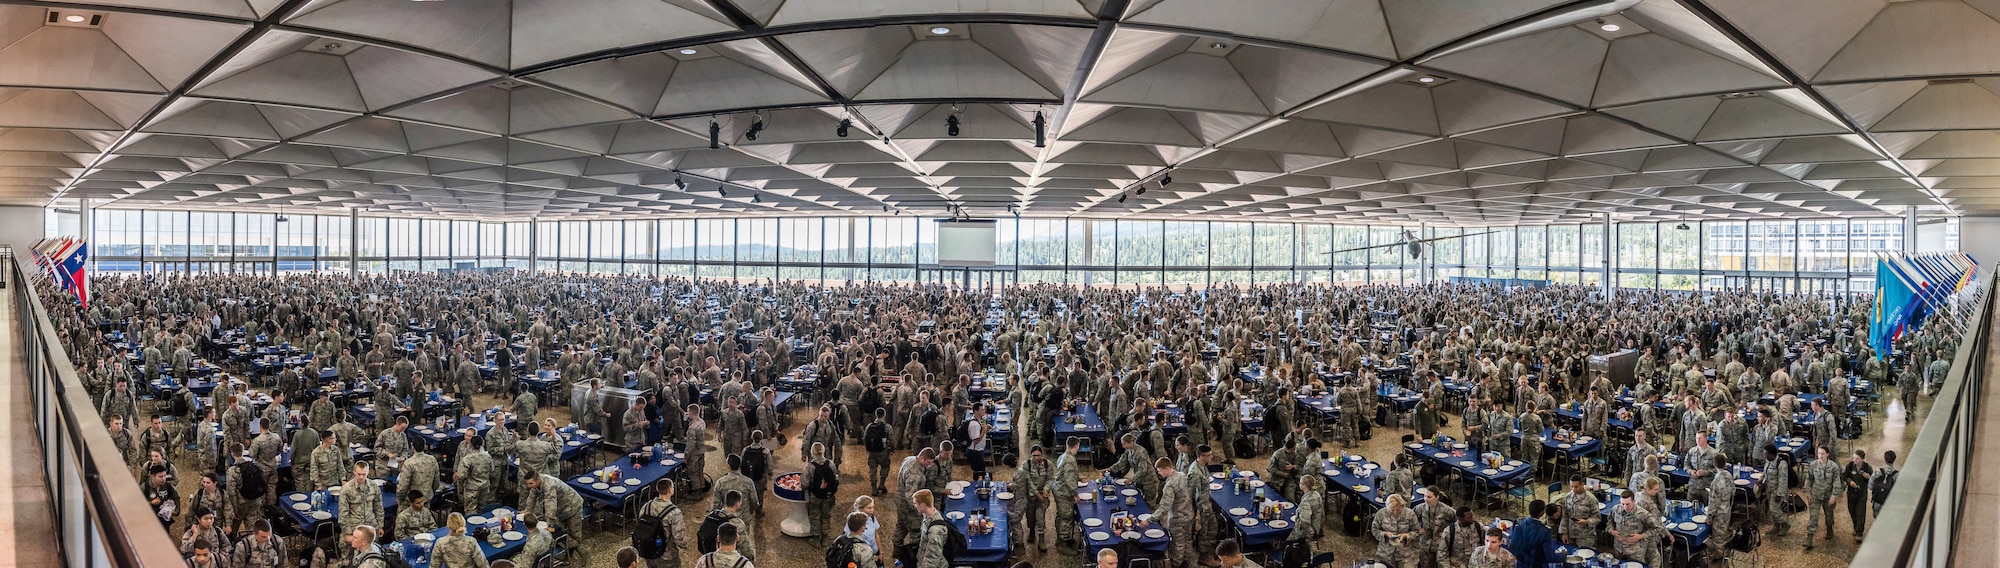 The Air Force Academy will roll out a pilot program expanding cadet dining options early next year. (Courtesy Photo)